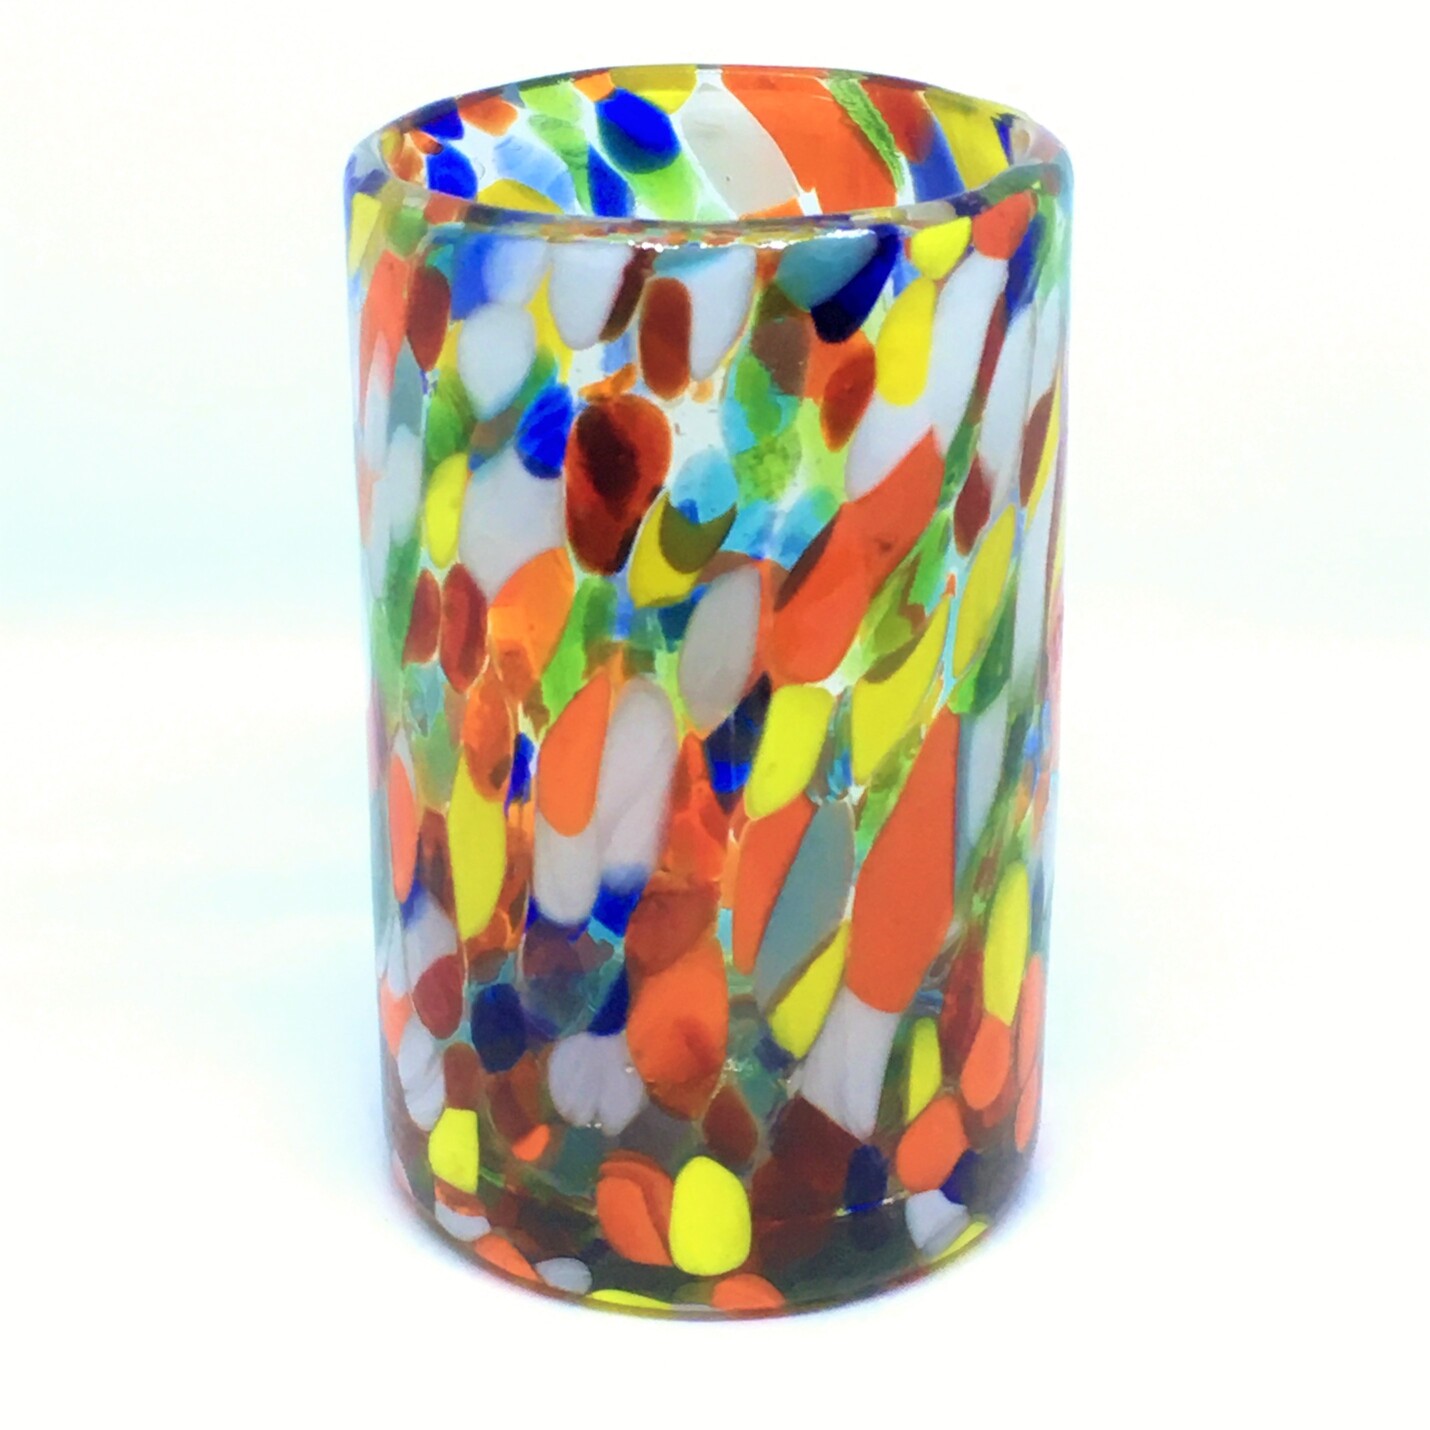 MEXICAN GLASSWARE / Confetti Carnival drinking glasses (set of 6) / Let the spring come into your home with this colorful set of glasses. The multicolor glass decoration makes them a standout in any place.